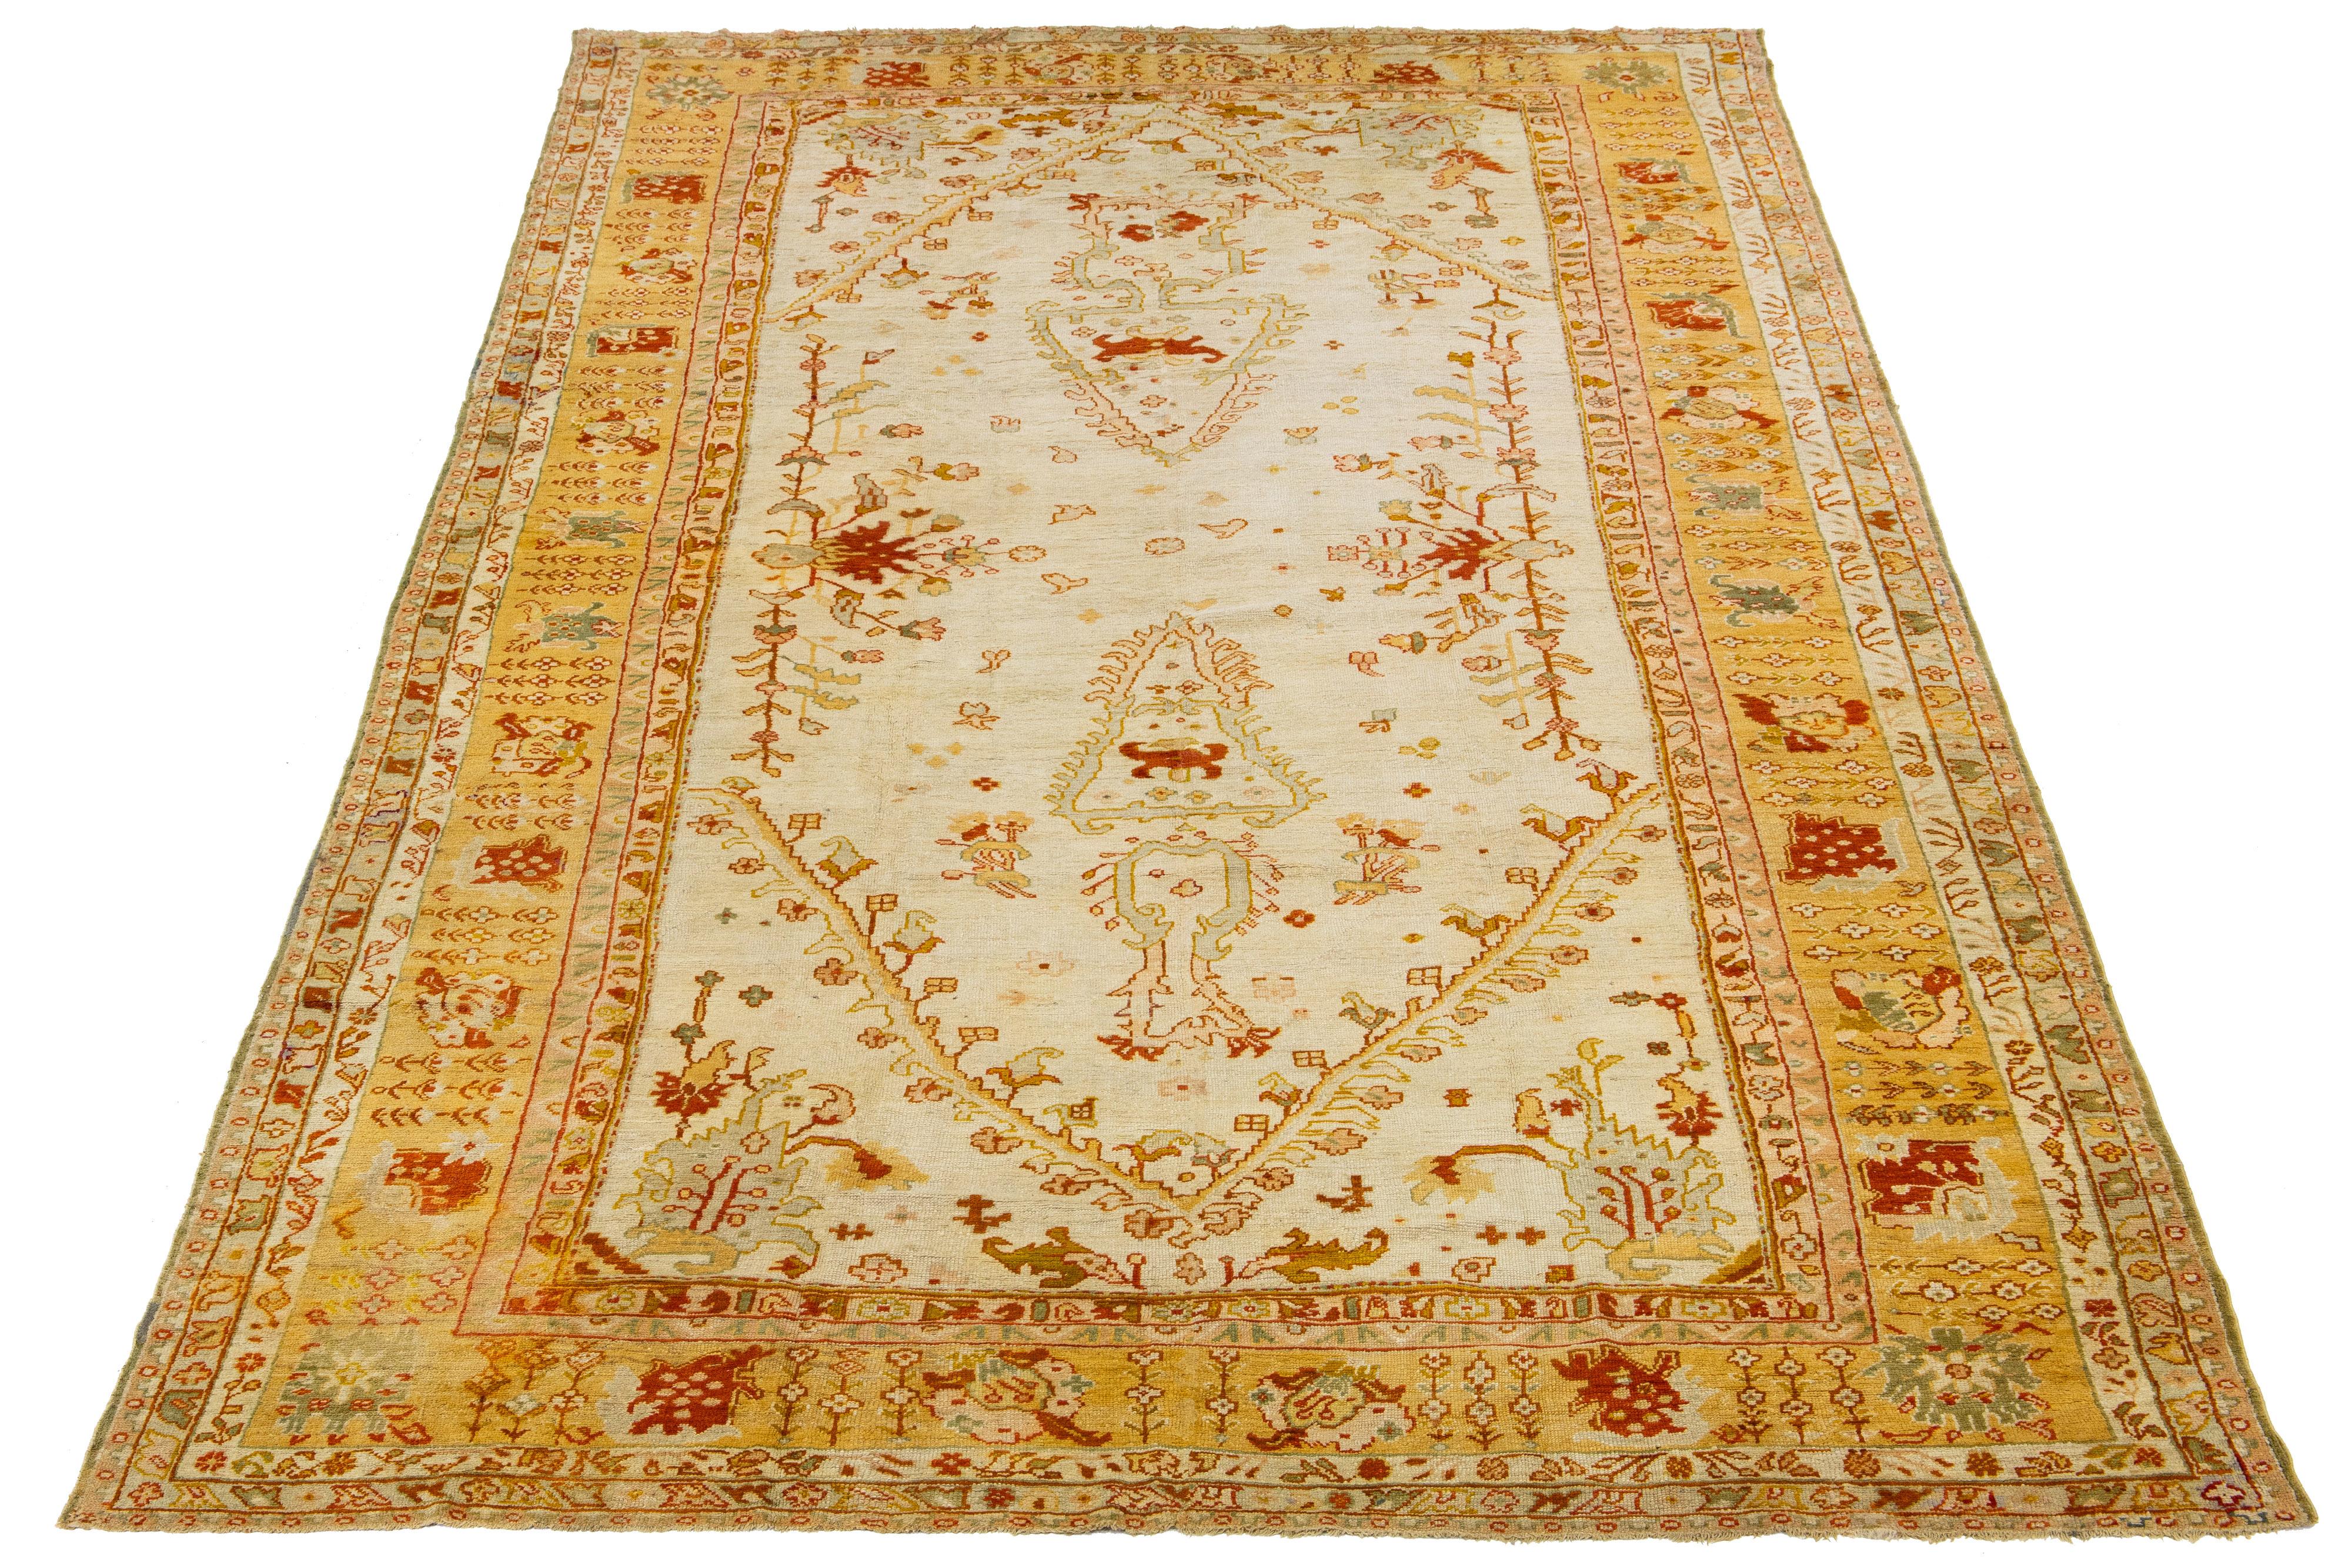 This antique Turkish wool rug is exceptional with its charming beige base color and meticulous hand-knotted craftsmanship. It showcases stunning yellow-gold, green, and red accents, displaying a captivating floral pattern.

This rug measures 9'9